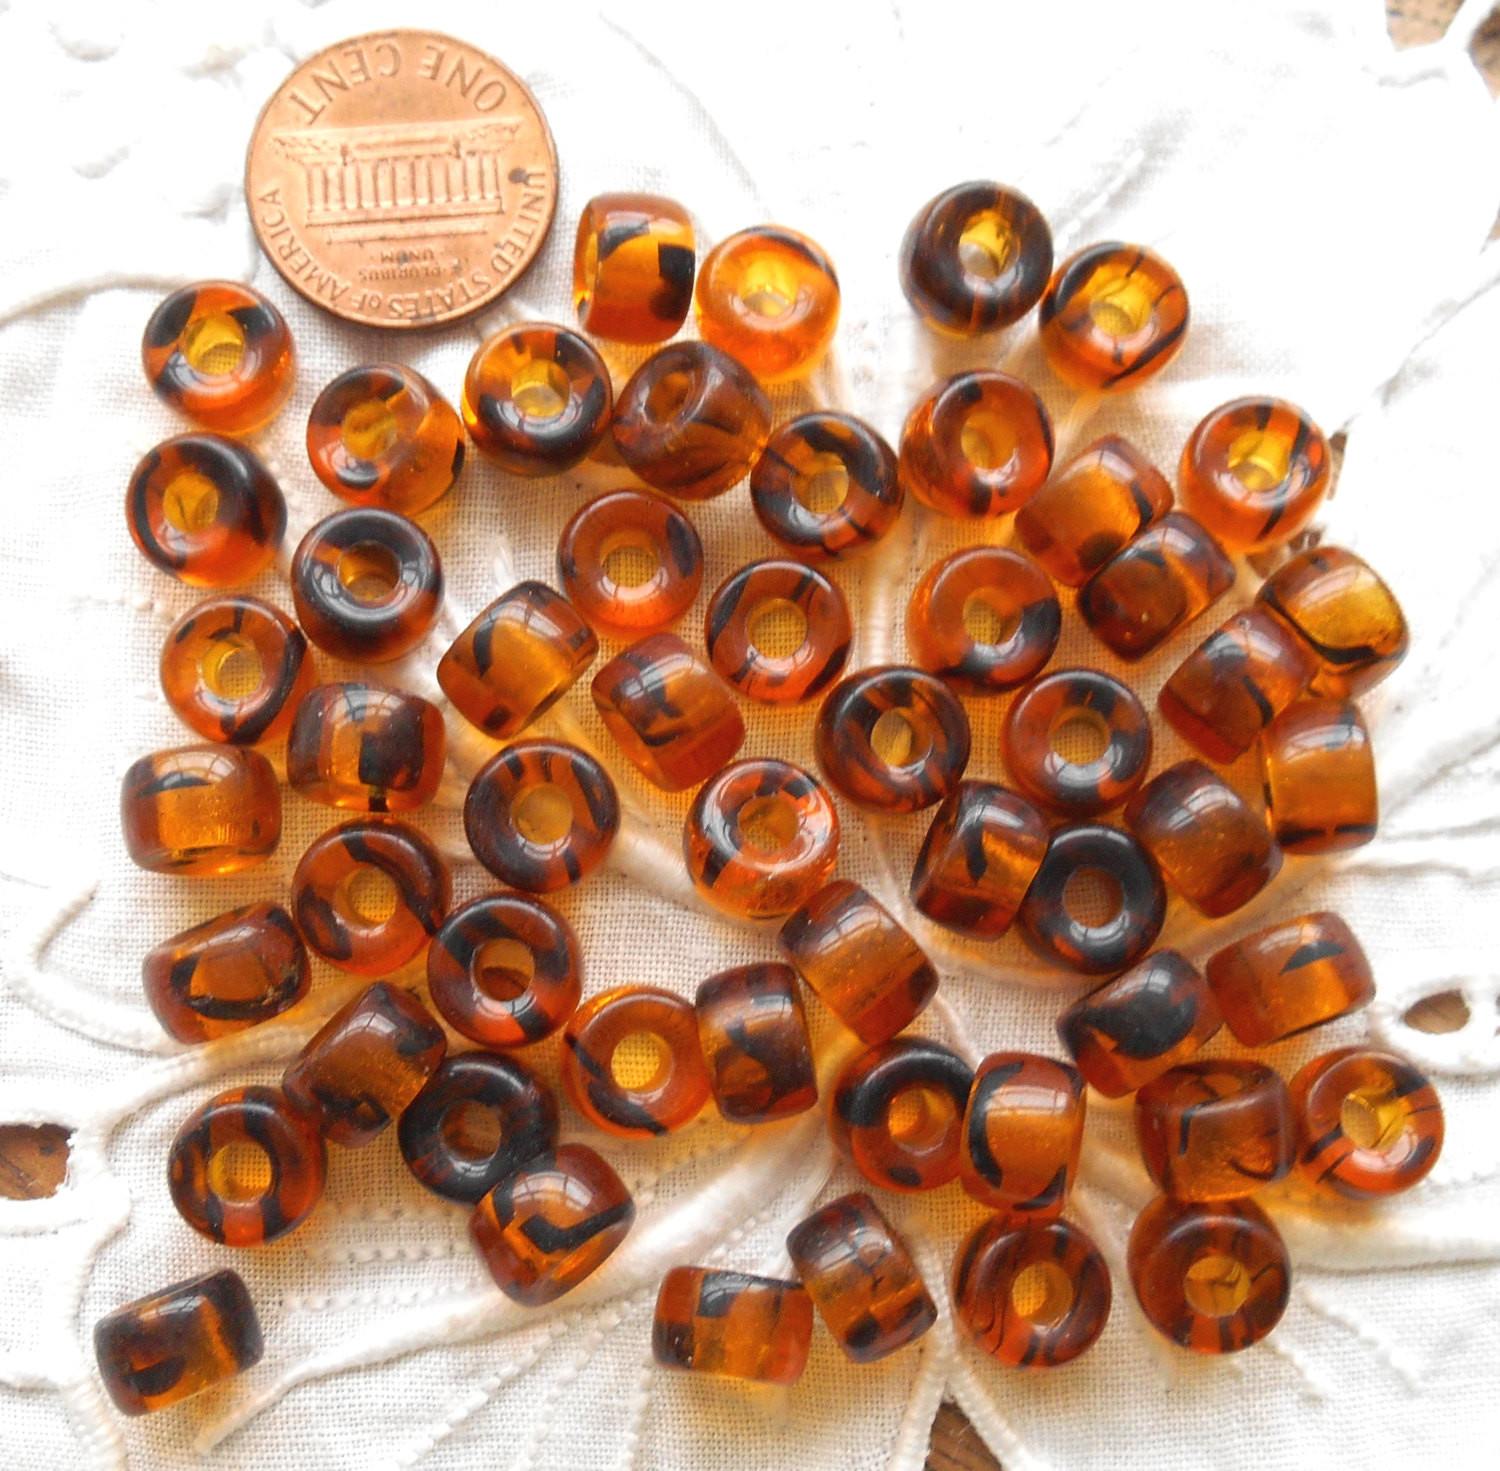 Large Hole Glass Beads, 8mm X 12mm Rondelle Roller With 5mm Hole